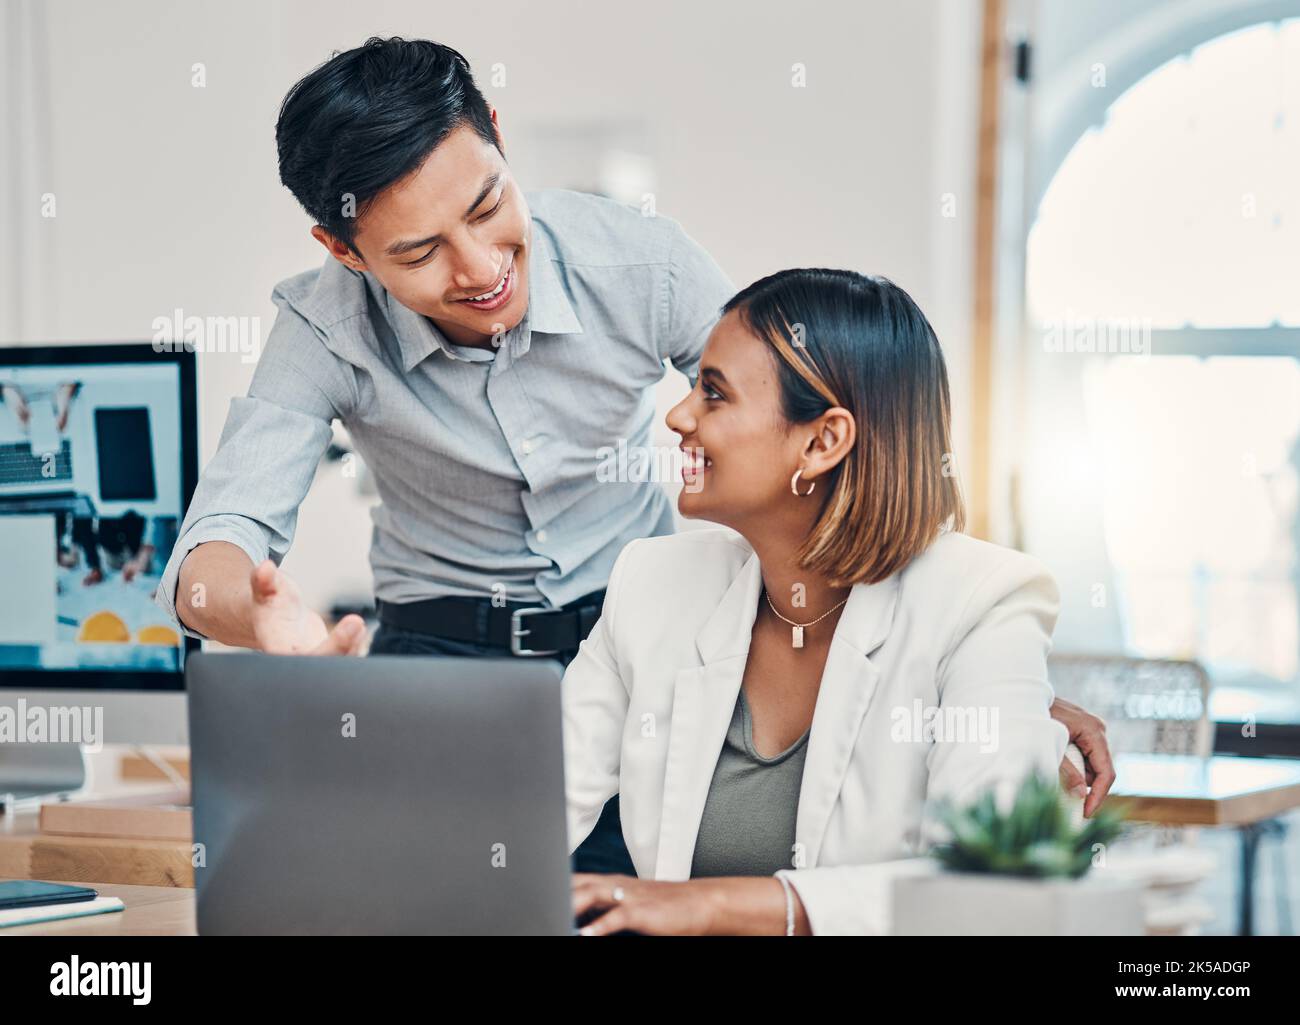 Startup company training, working people at desk and asian manager coaching employee in Singapore office. Indian woman learning finance advice Stock Photo